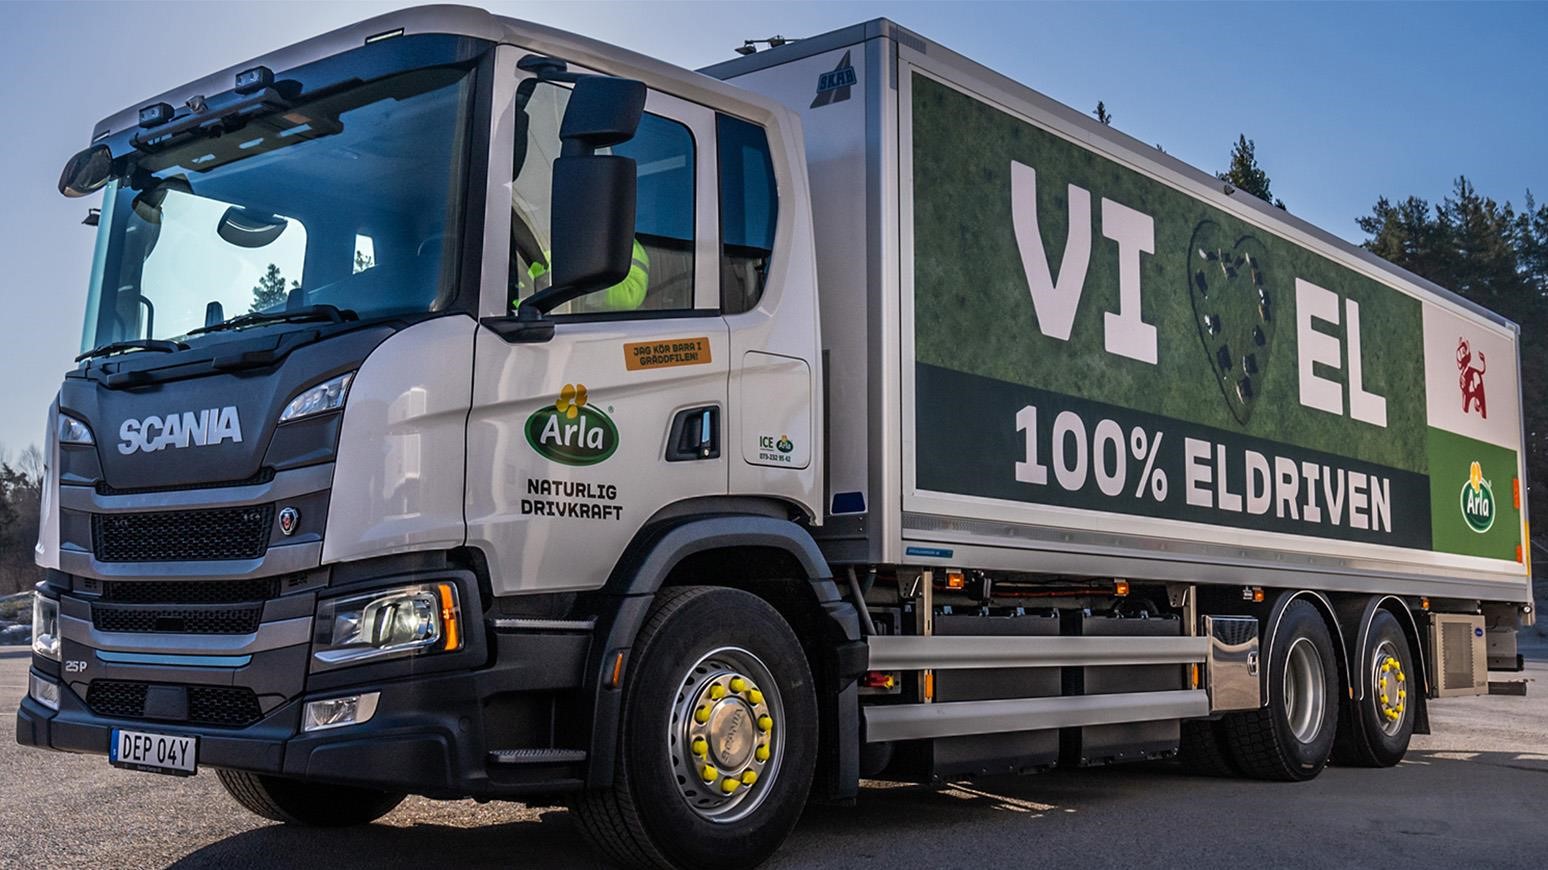 Arla Chooses Scania Electric Truck For Zero-Emission Dairy Deliveries In Stockholm